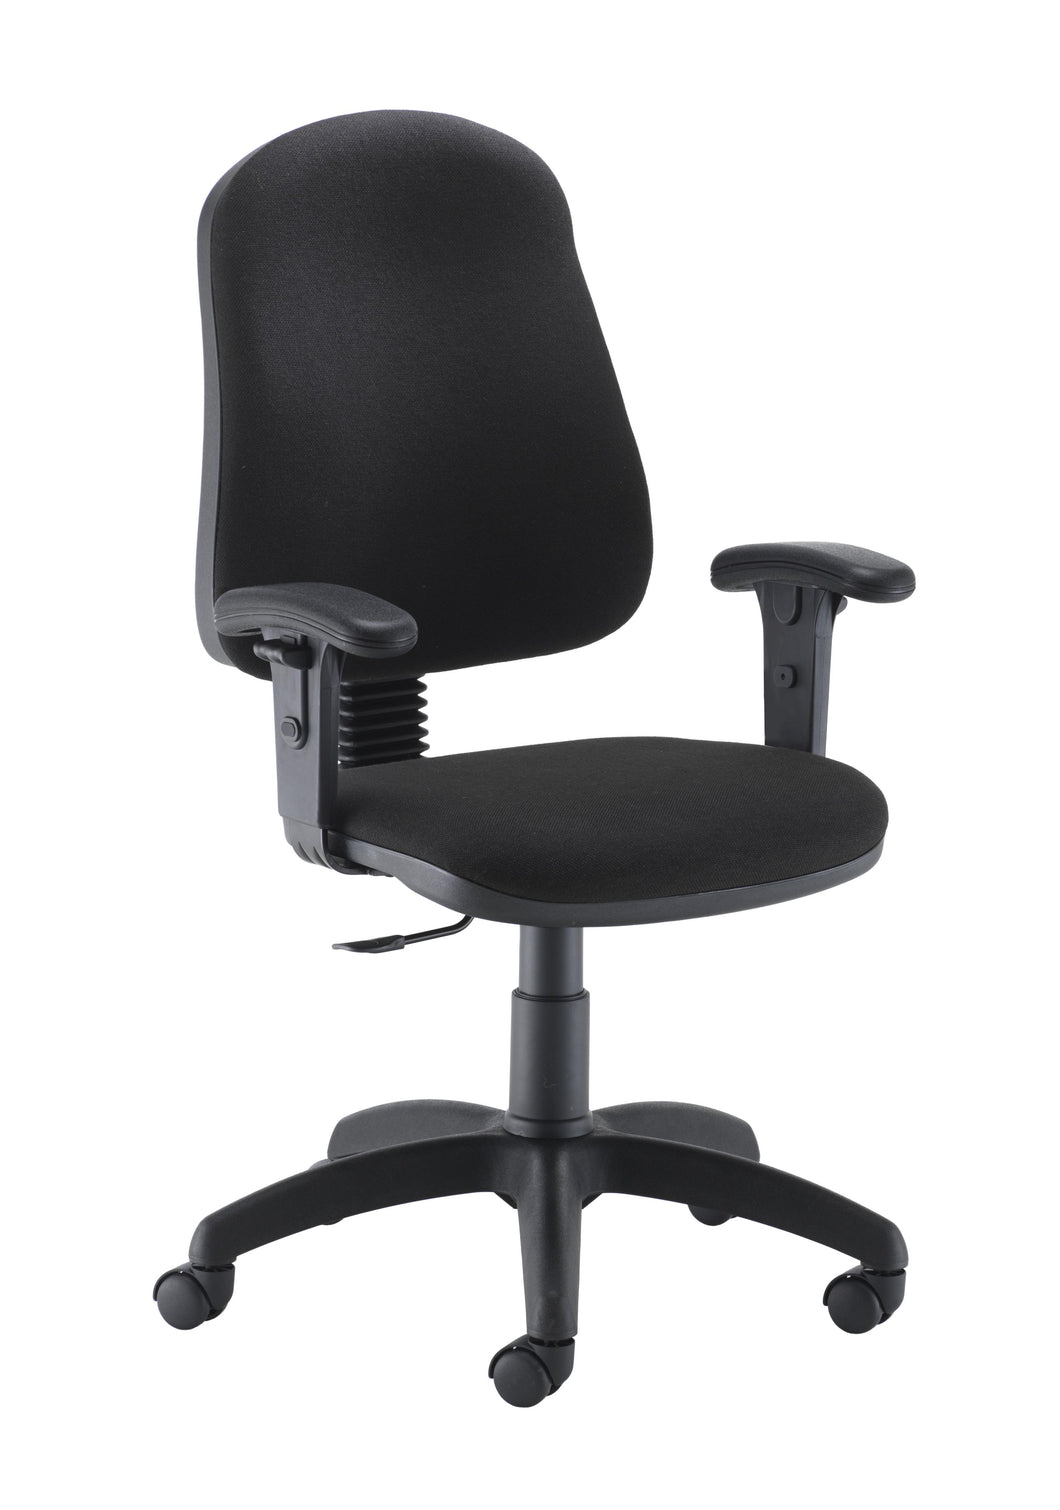 Calypso 2 Single Lever Office Chair with Fixed Back and Adjustable Arms | Black